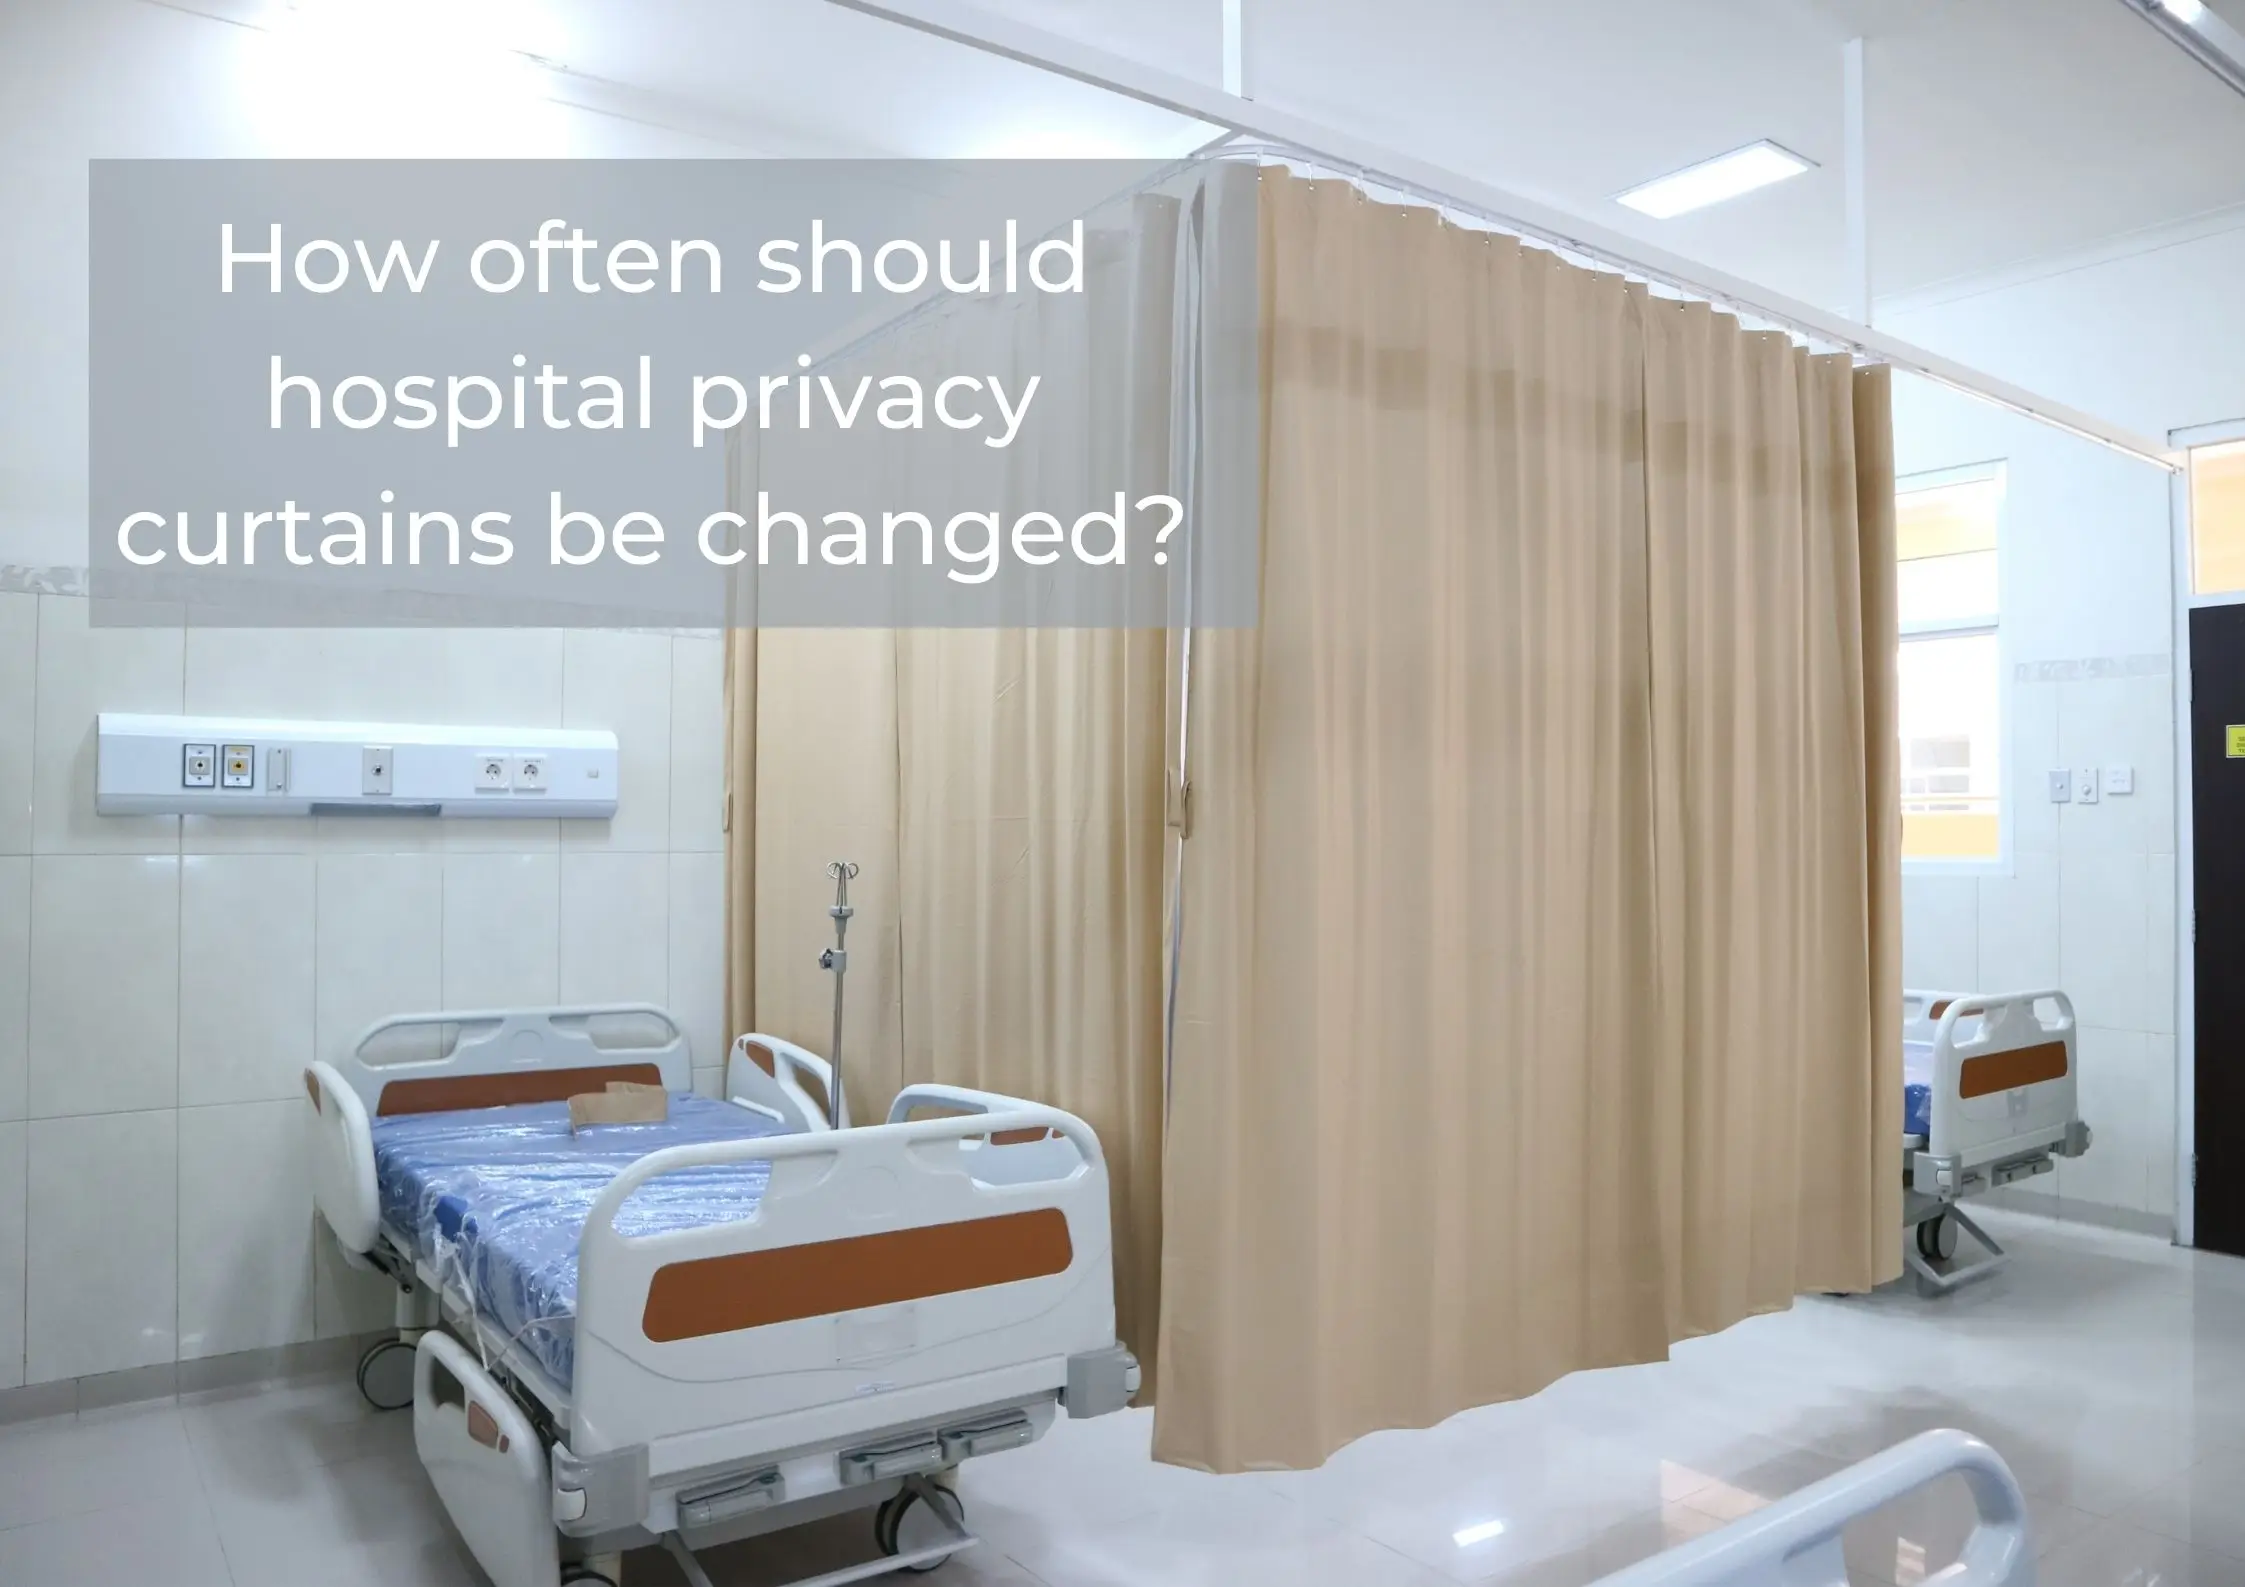 how often should hosptial privacy curtains be changed